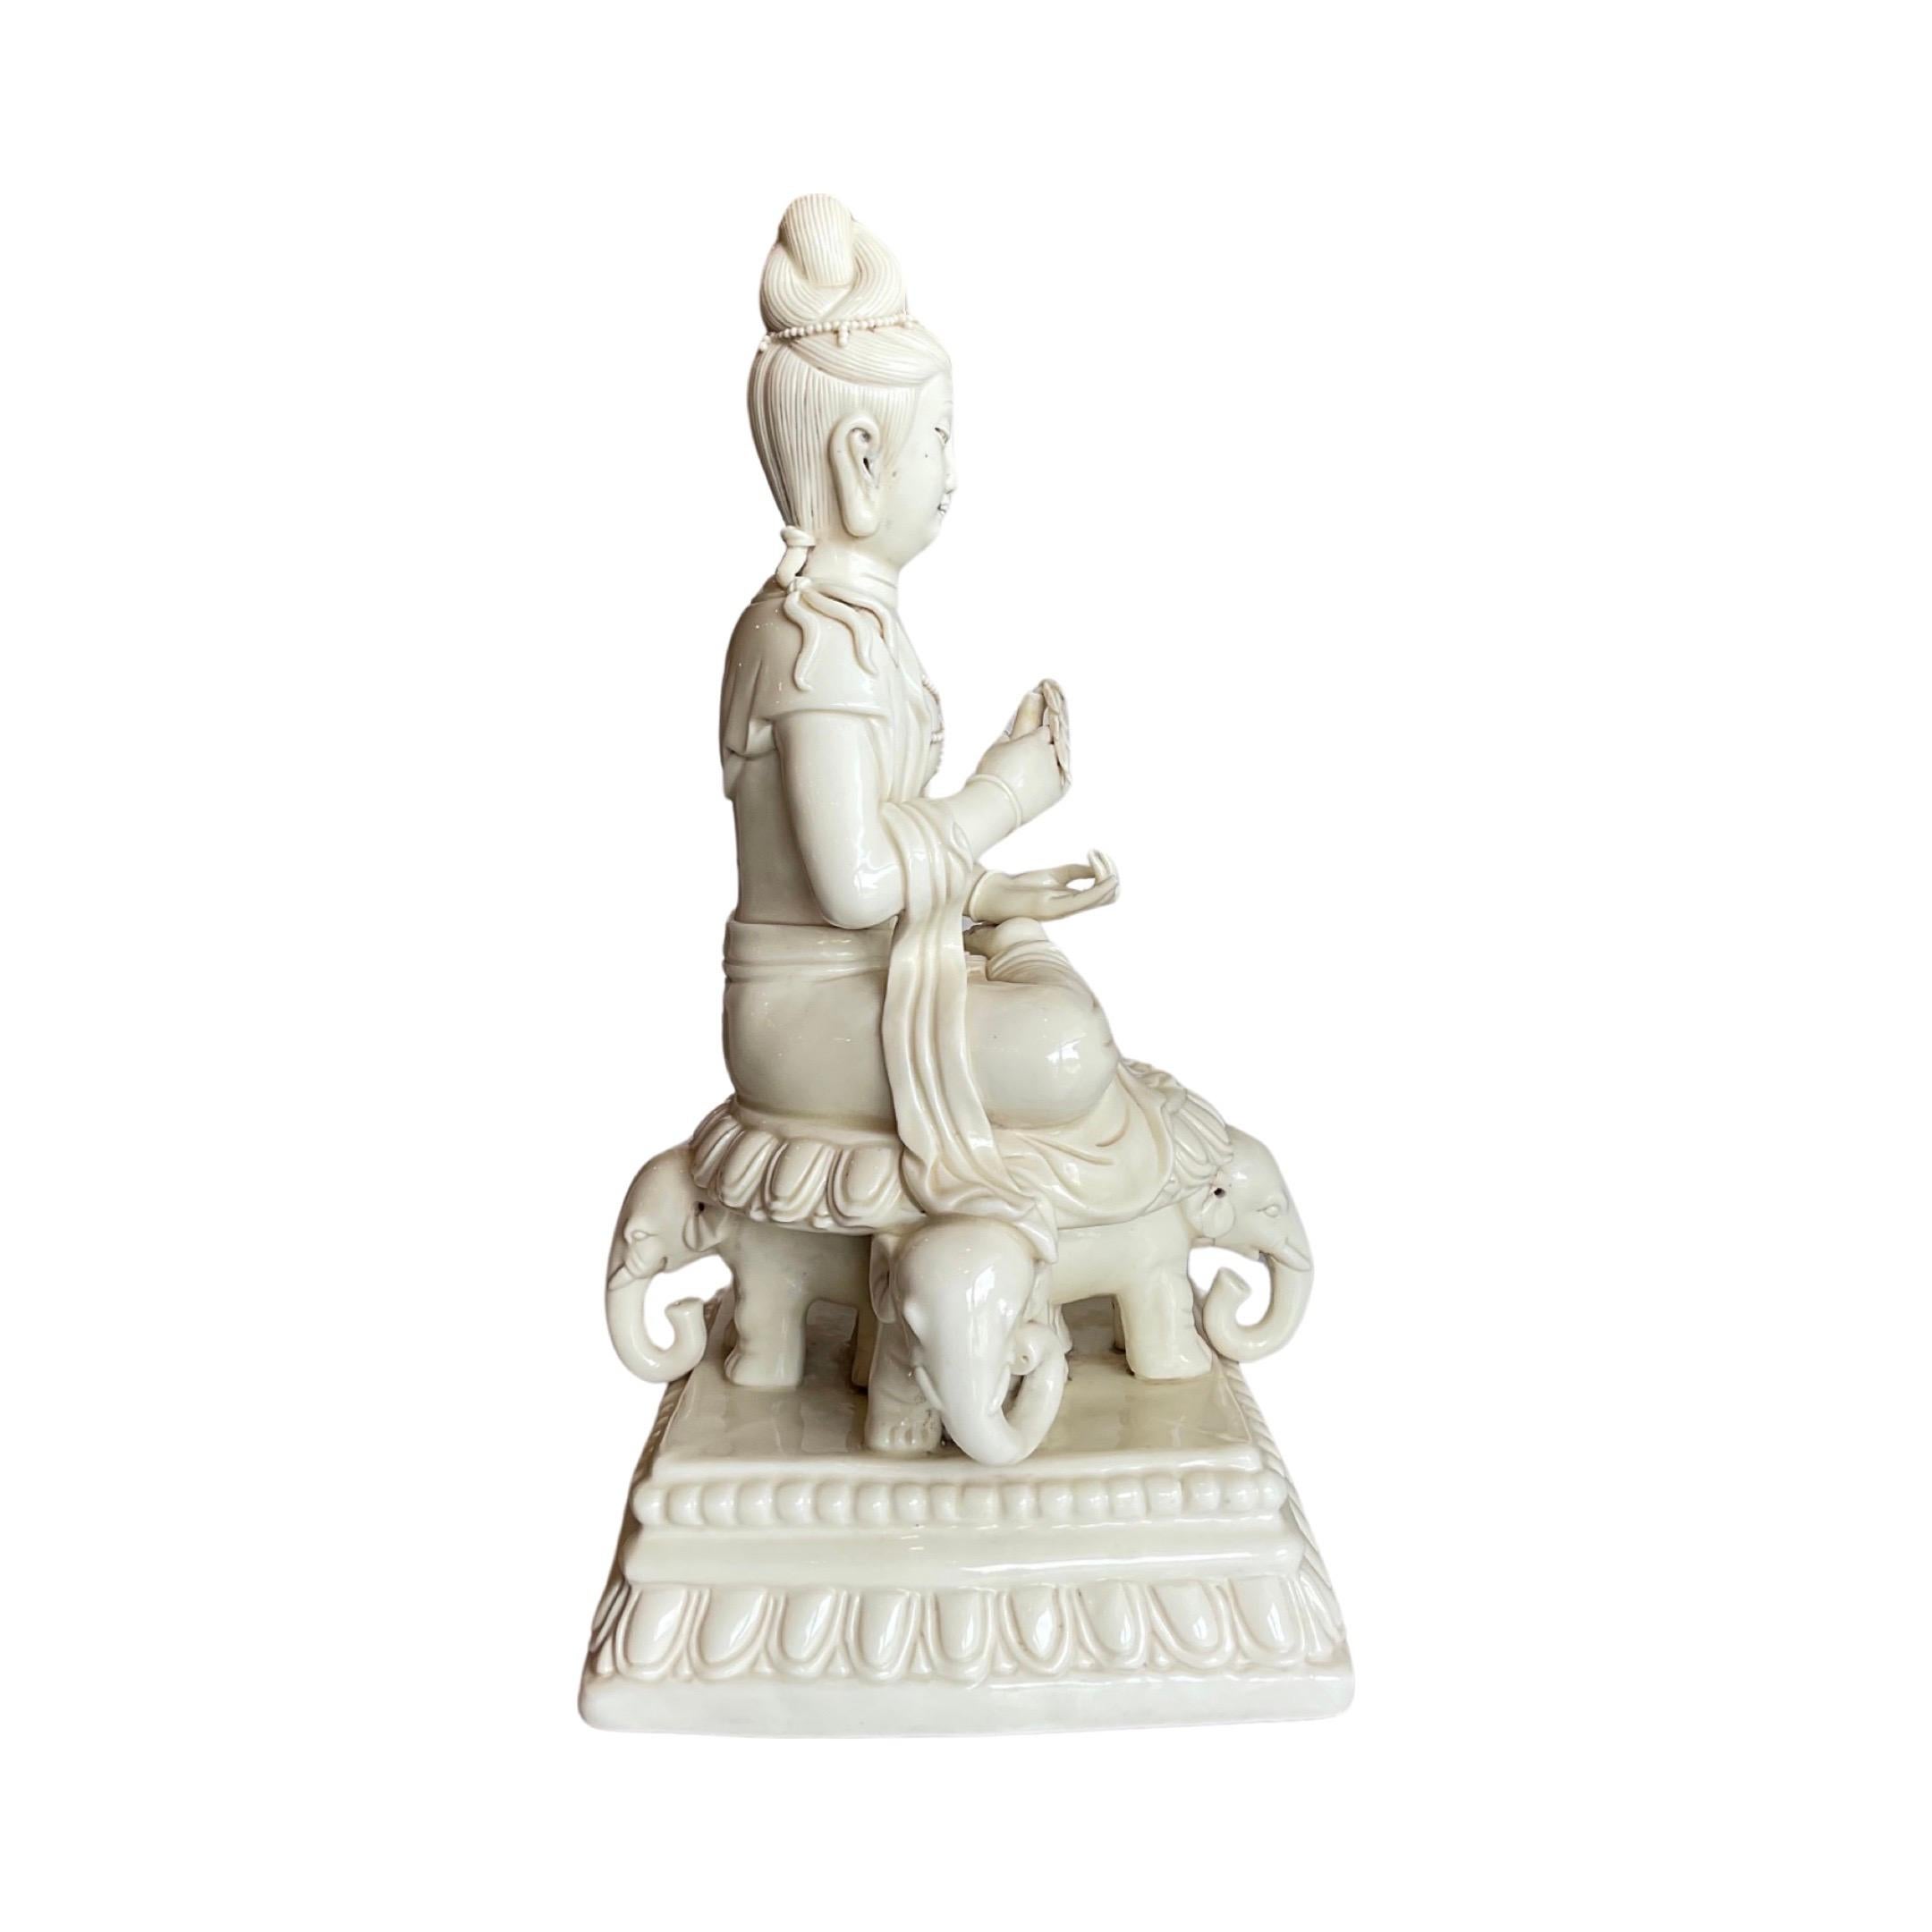 This stunning Chinese porcelain sculpture of the deity Guanyin, the Goddess of Mercy, was crafted in China in the 1880s. Featuring intricate details and fine-tuned craftsmanship, this is a timeless piece of artwork that will be sure to bring a